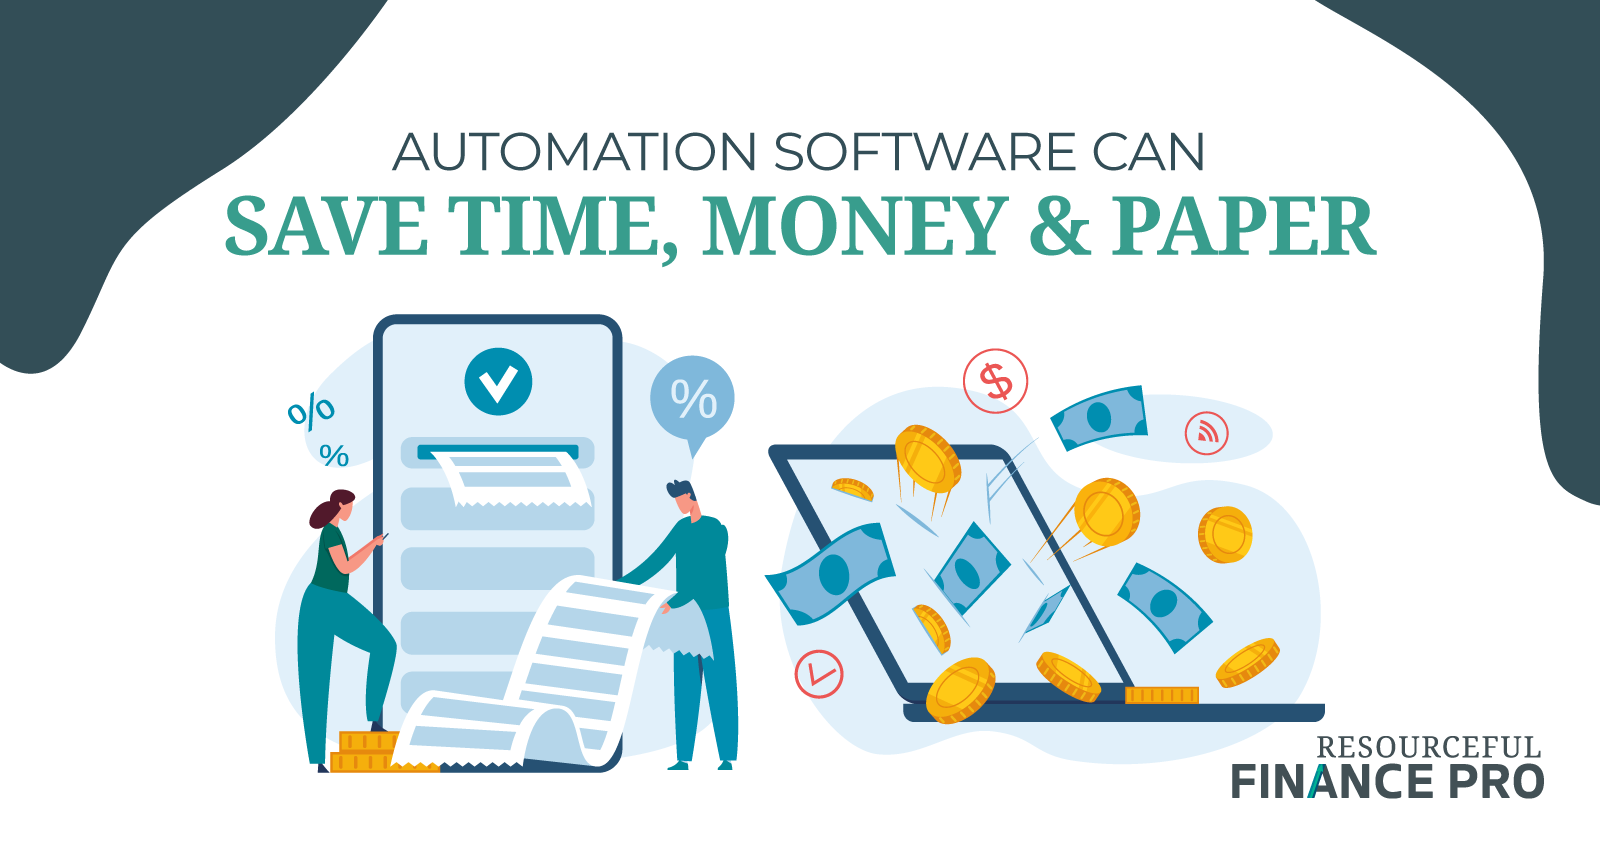 Automation Software Can Save Time Money & Paper